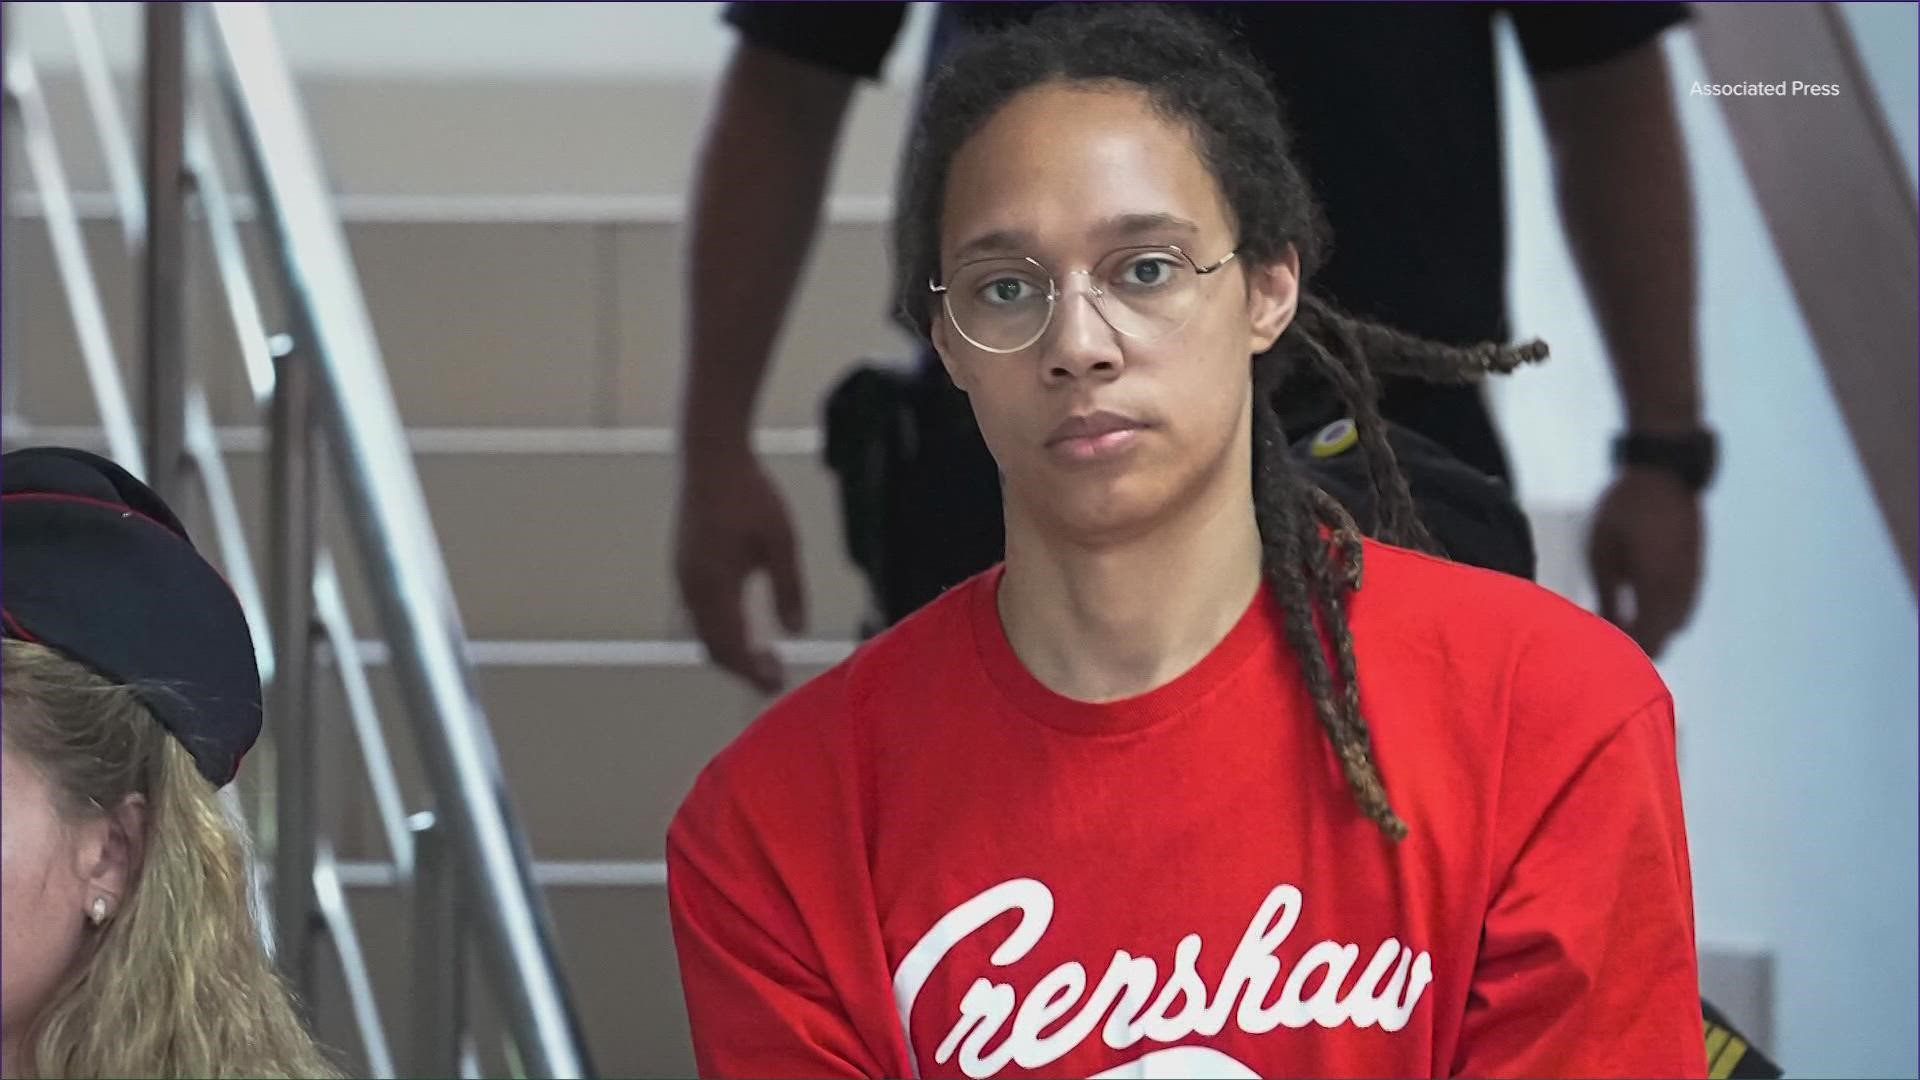 After losing an appeal to her nine-year sentence in Russia, Brittney Griner is expected to be transferred to a penal colony.